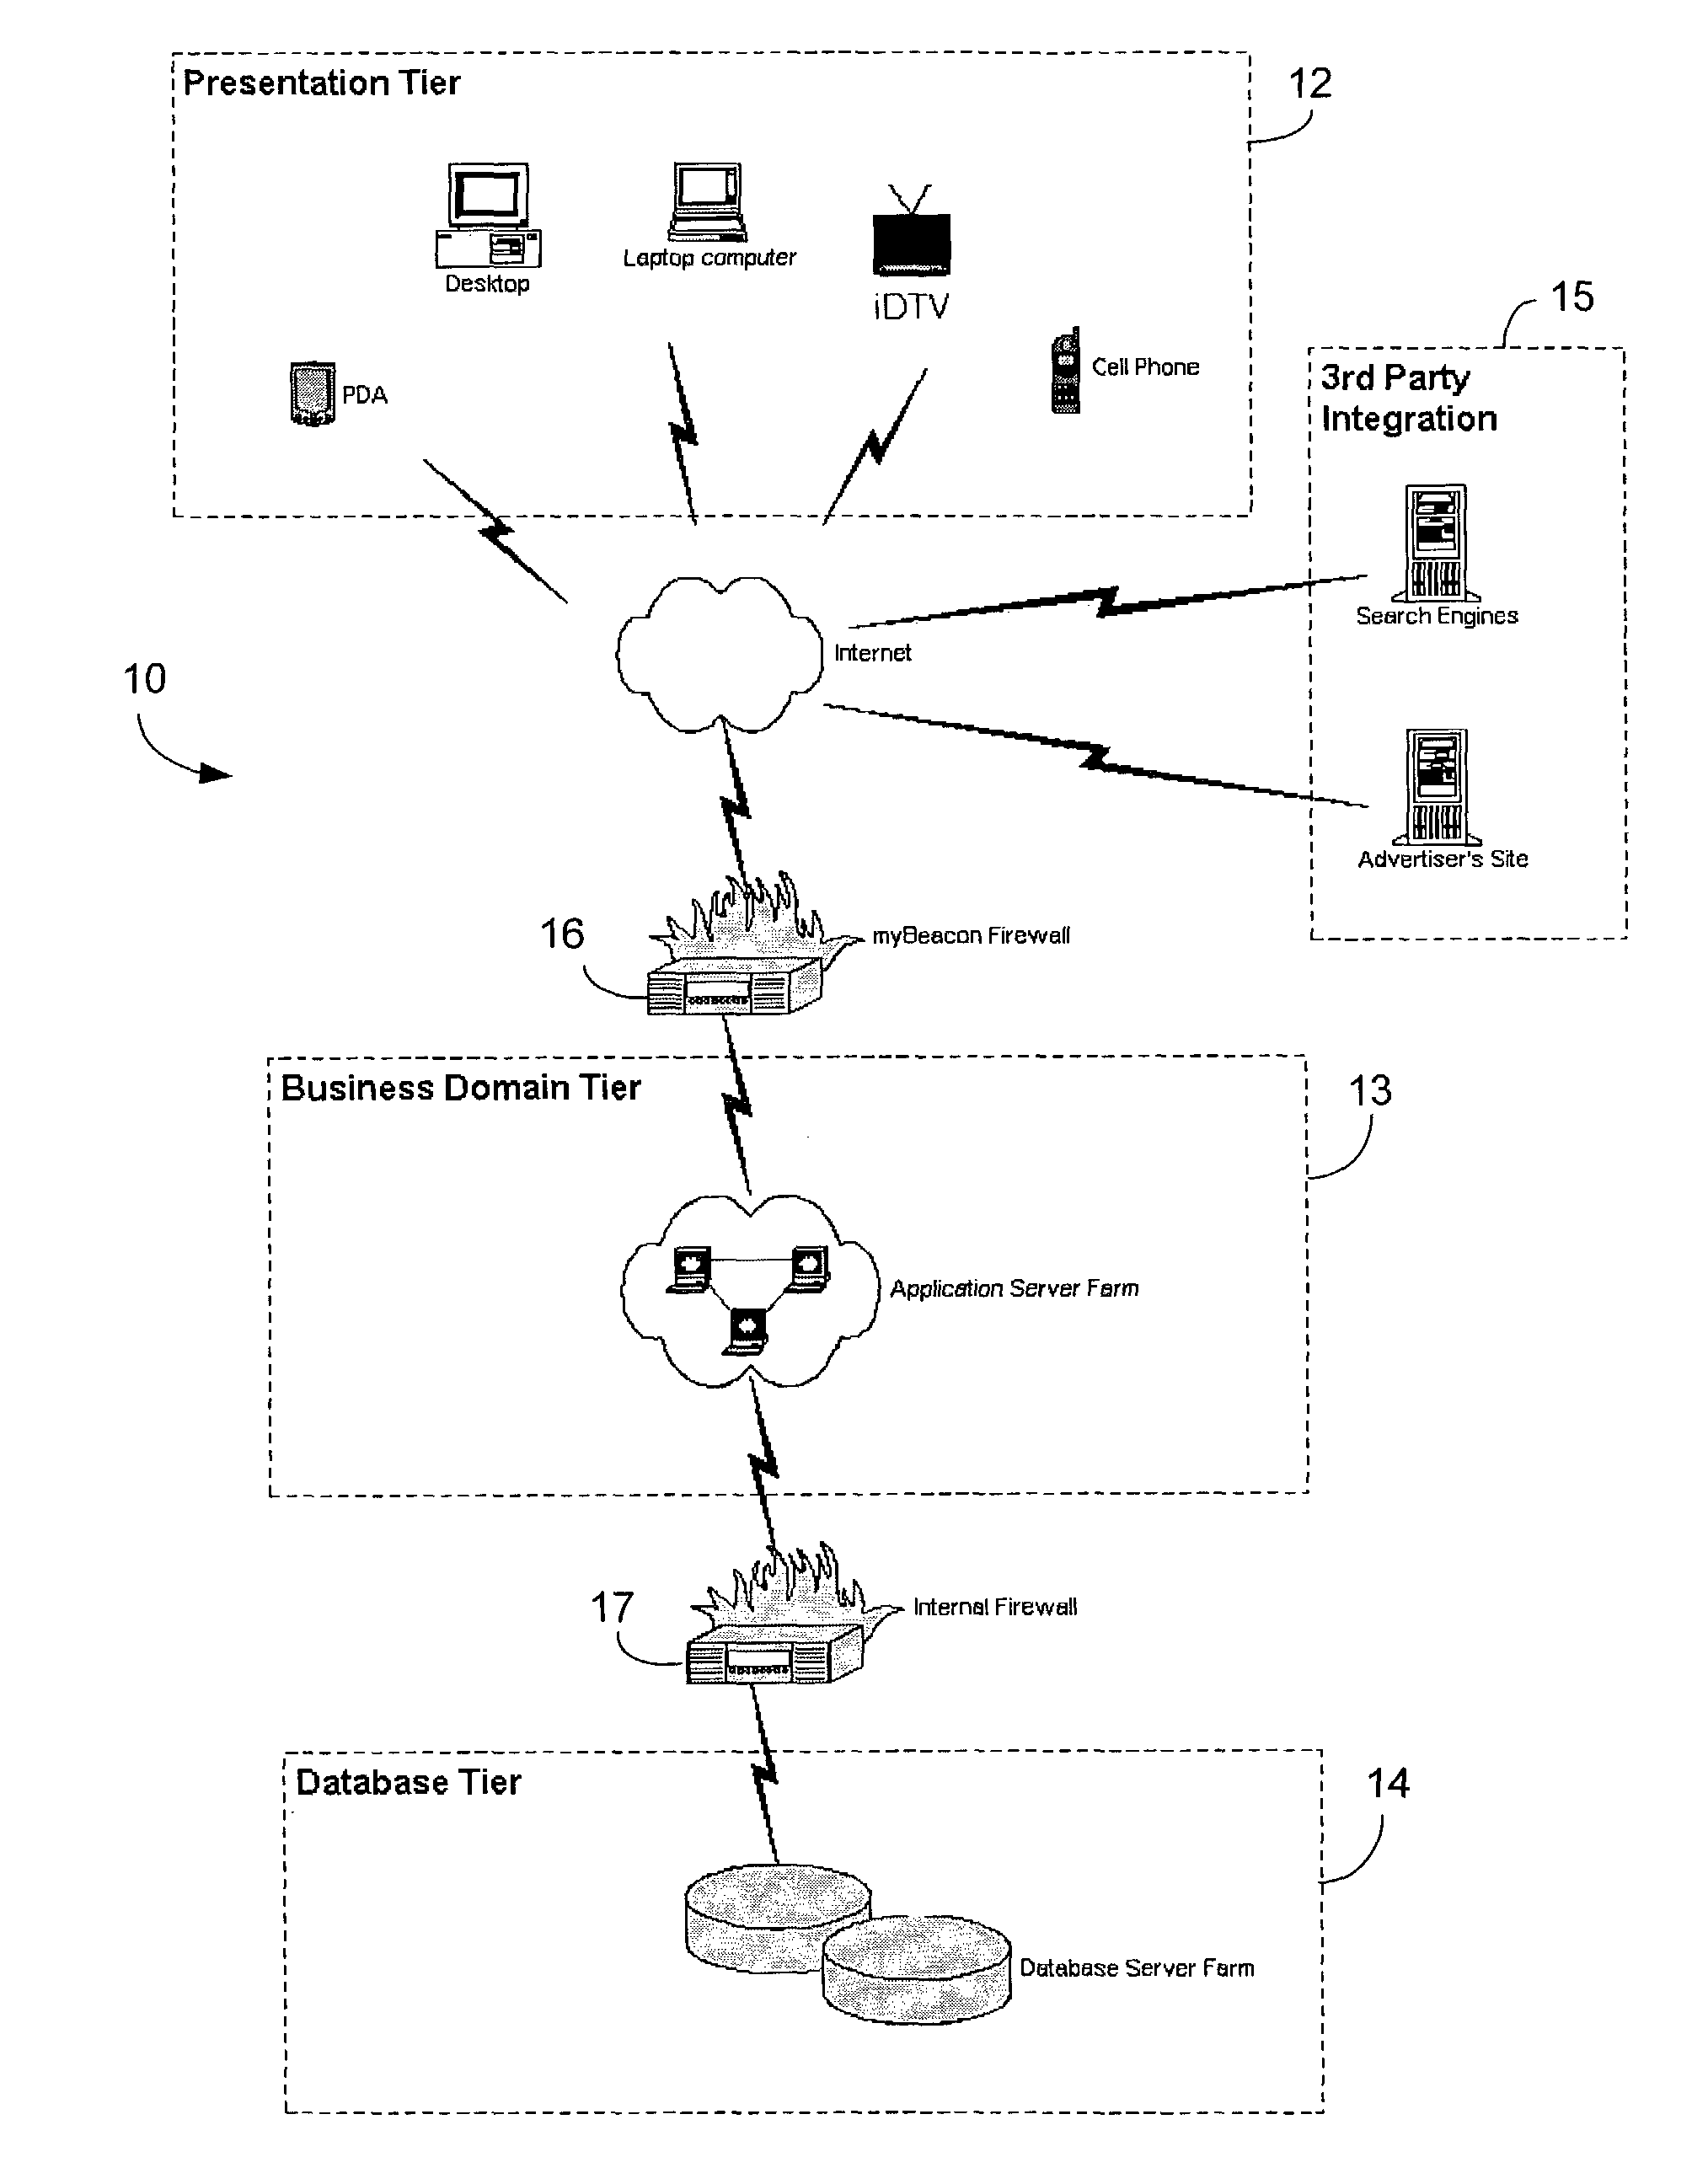 Content distribution system